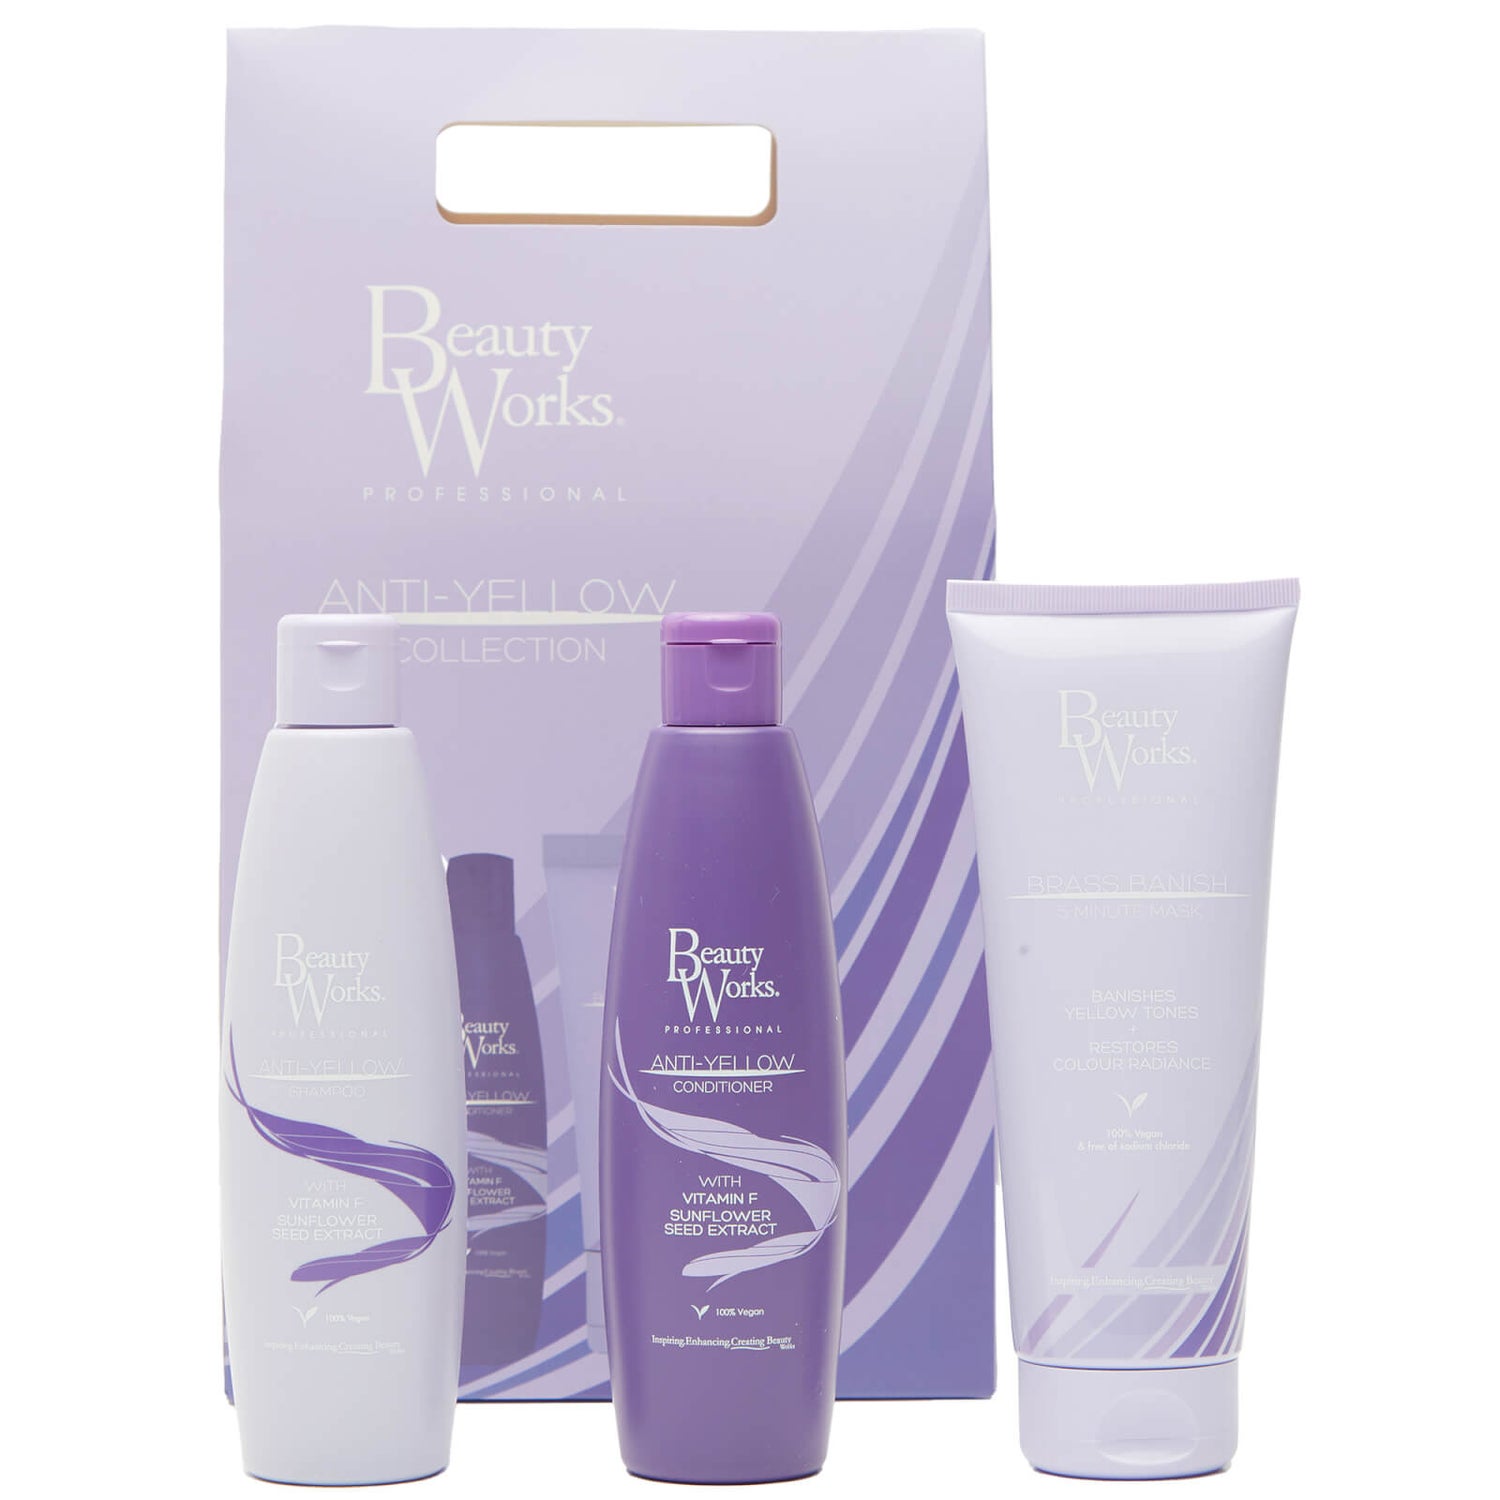 Beauty Works Anti-Yellow Collection Gift Set